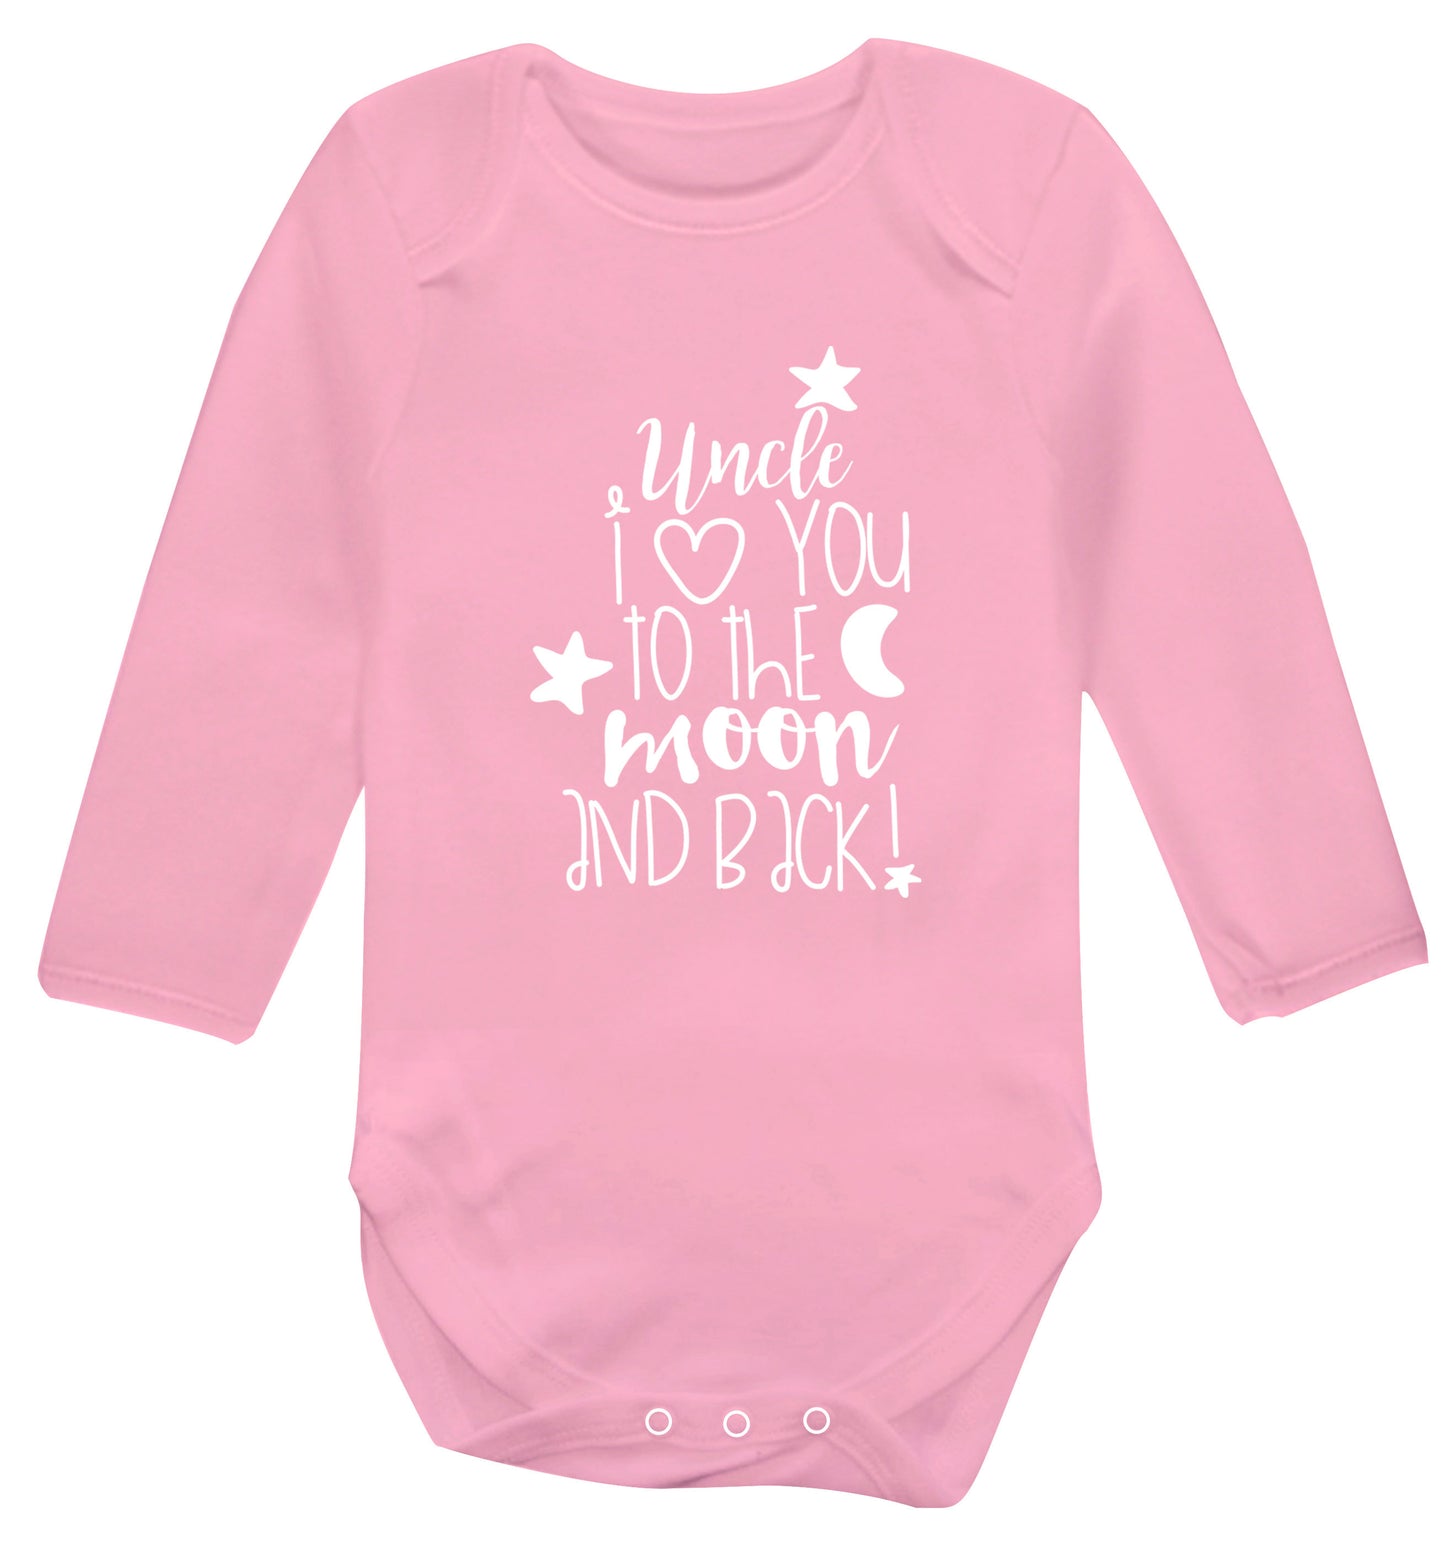 Uncle I love you to the moon and back Baby Vest long sleeved pale pink 6-12 months